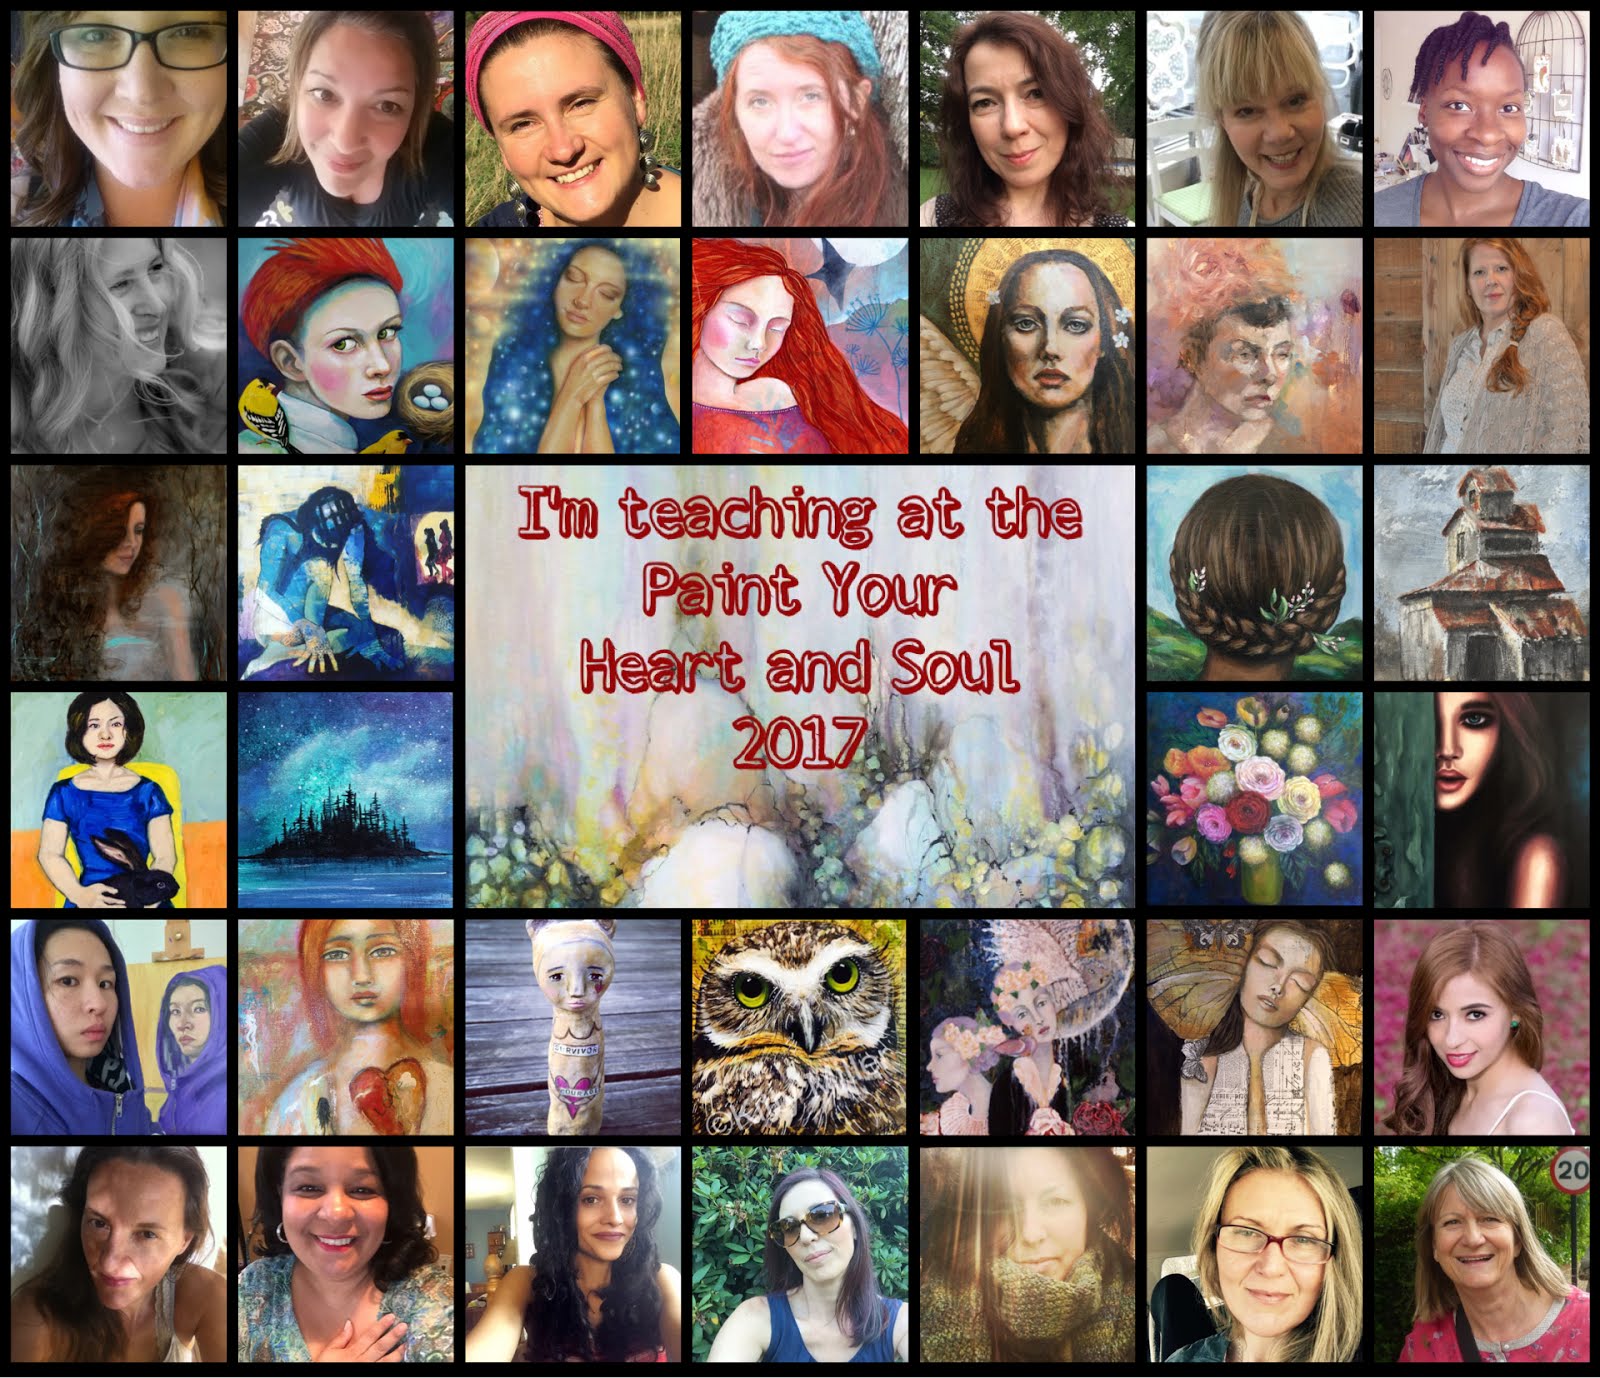 Paint Your Heart and Soul 2017 online class